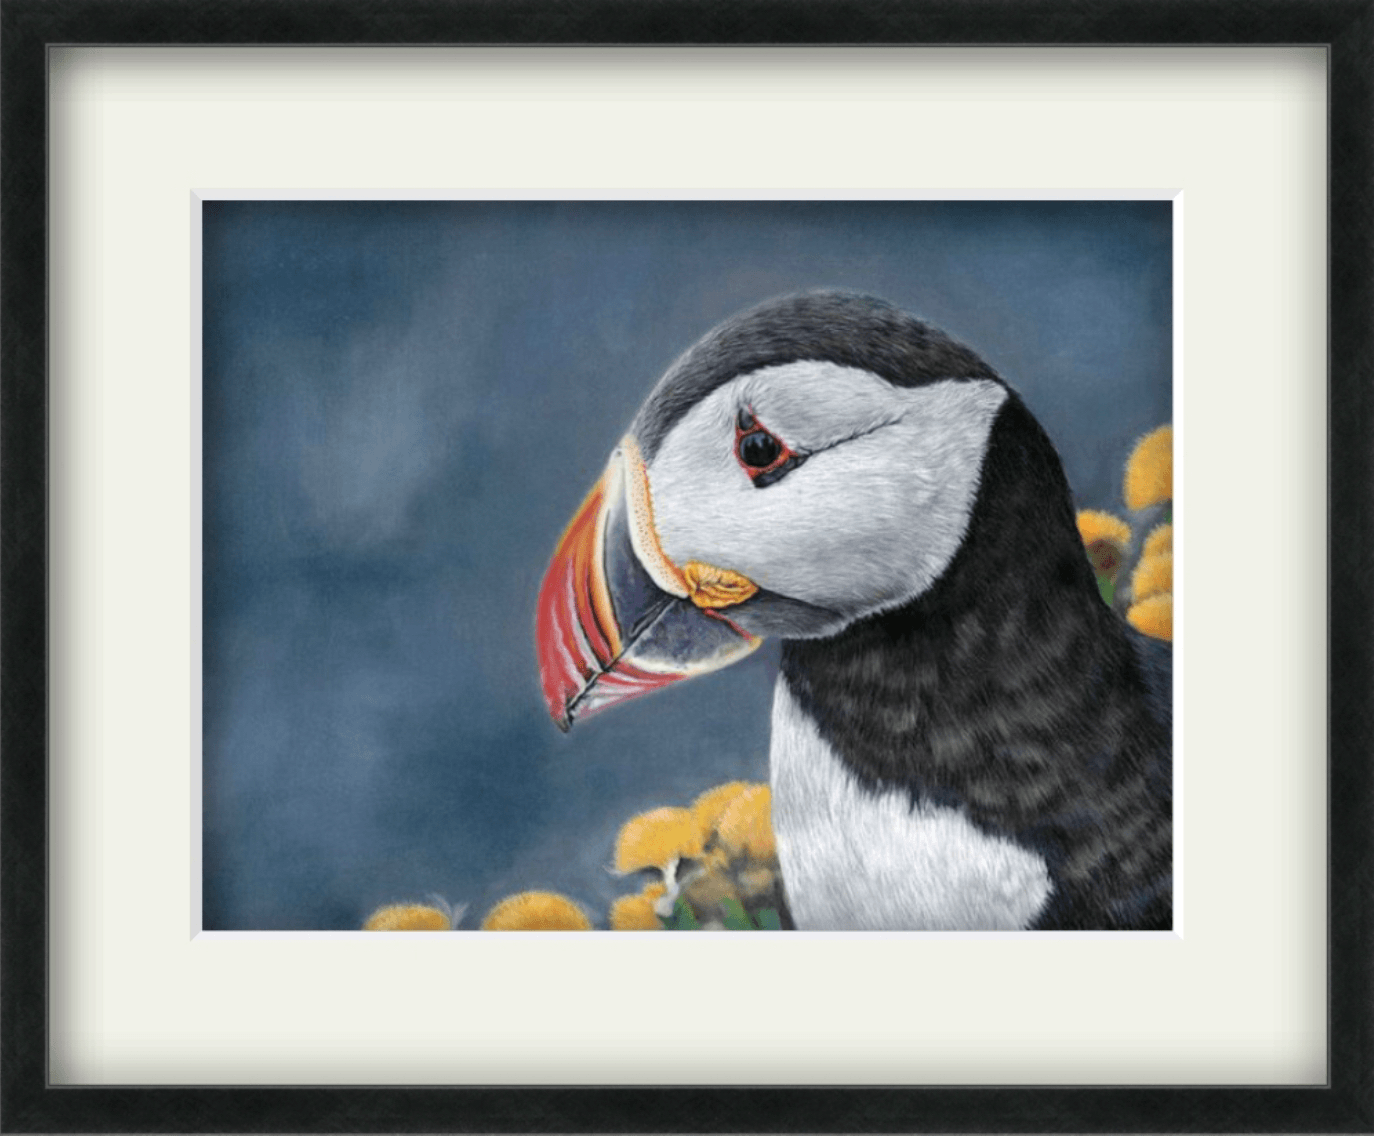 Puffin ll - Gigglewick Gallery